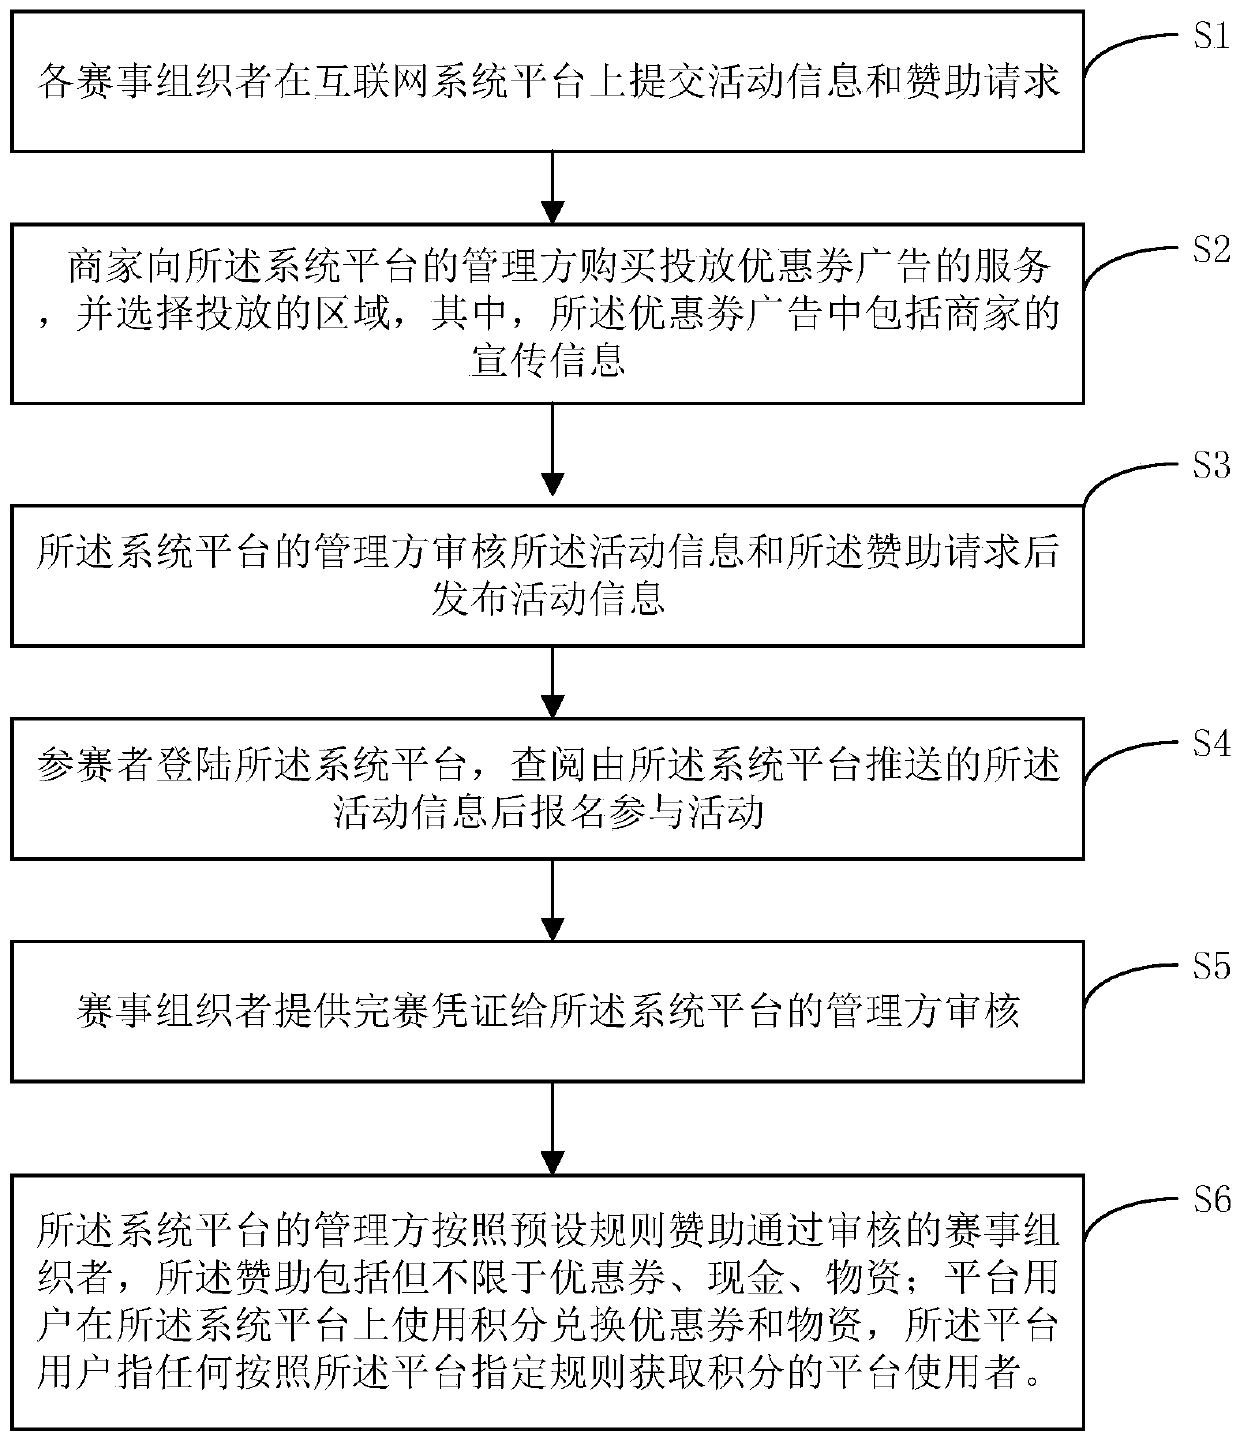 Big data comprehensive management method and system for community recreational and sports activities and commercial operation